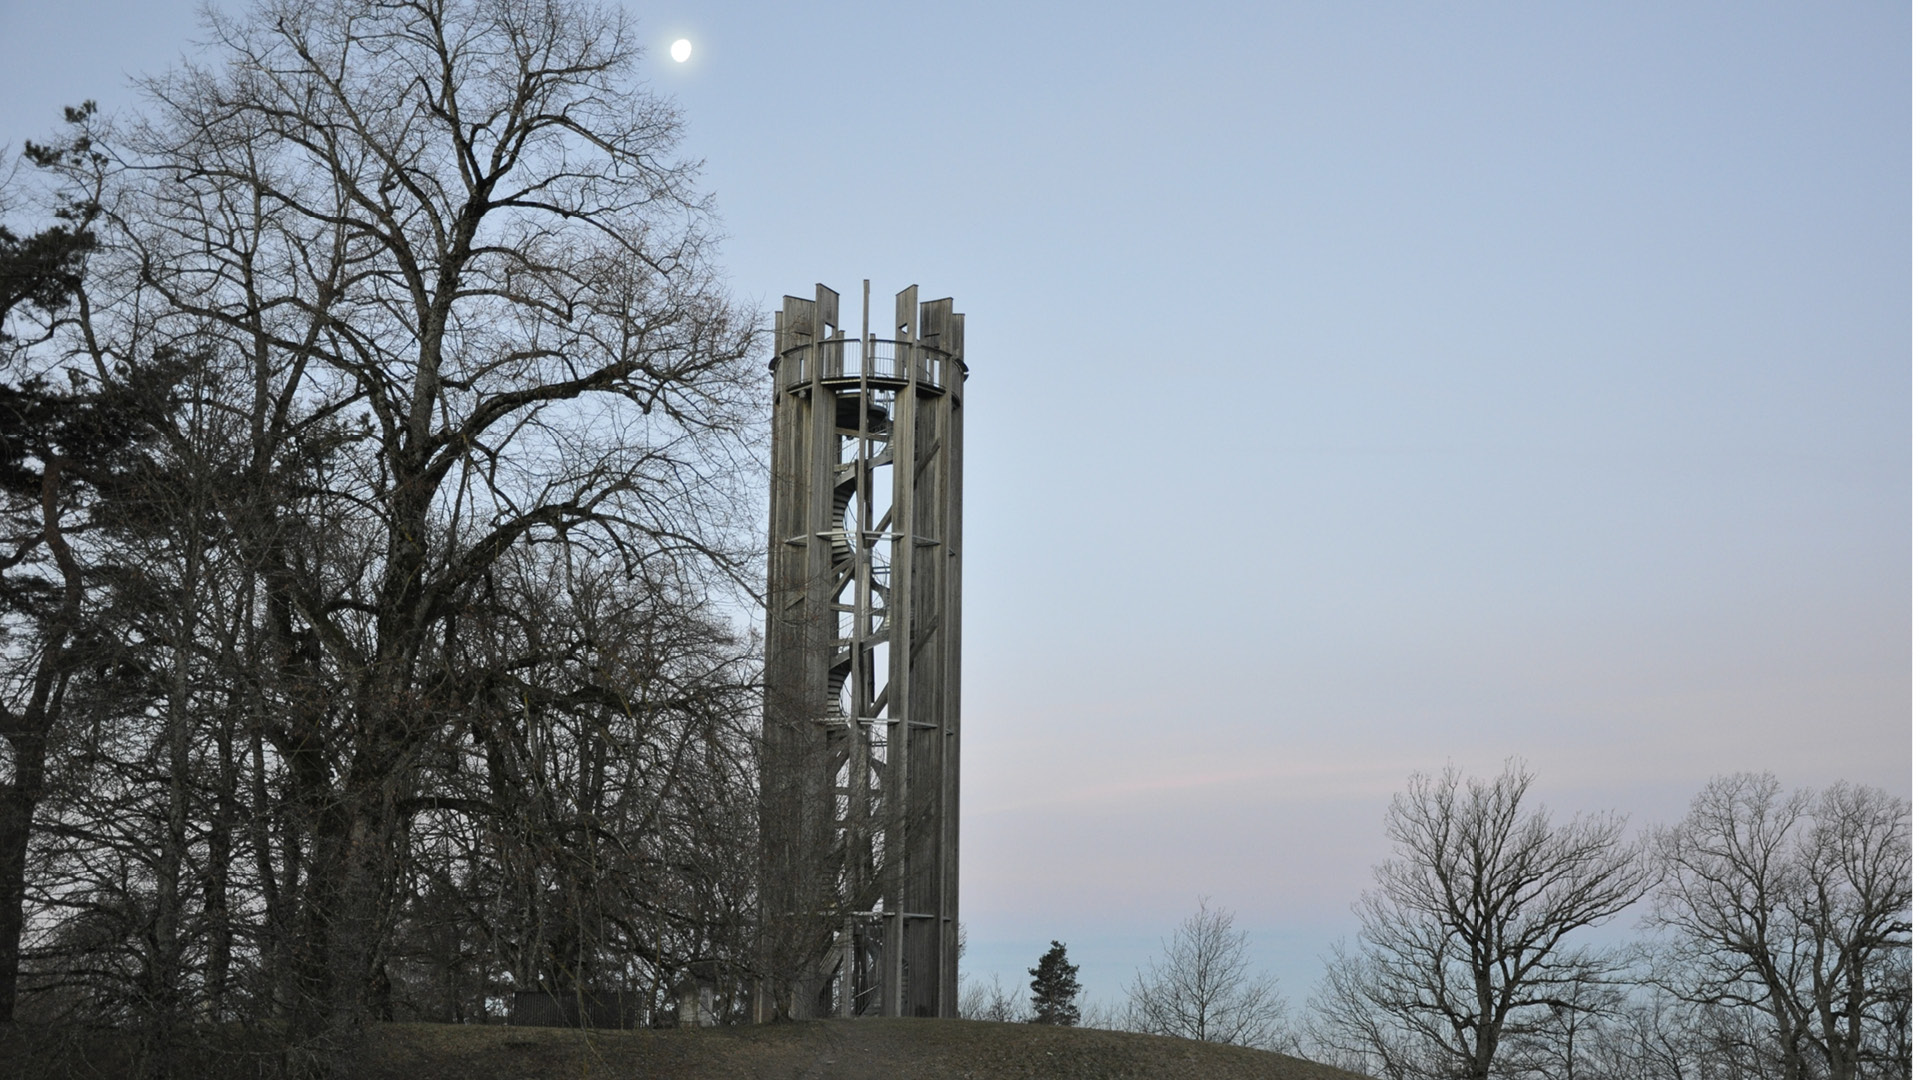 The viewing platform on the Gurten in the fall. The trees are bare and the moon is shining behind them.